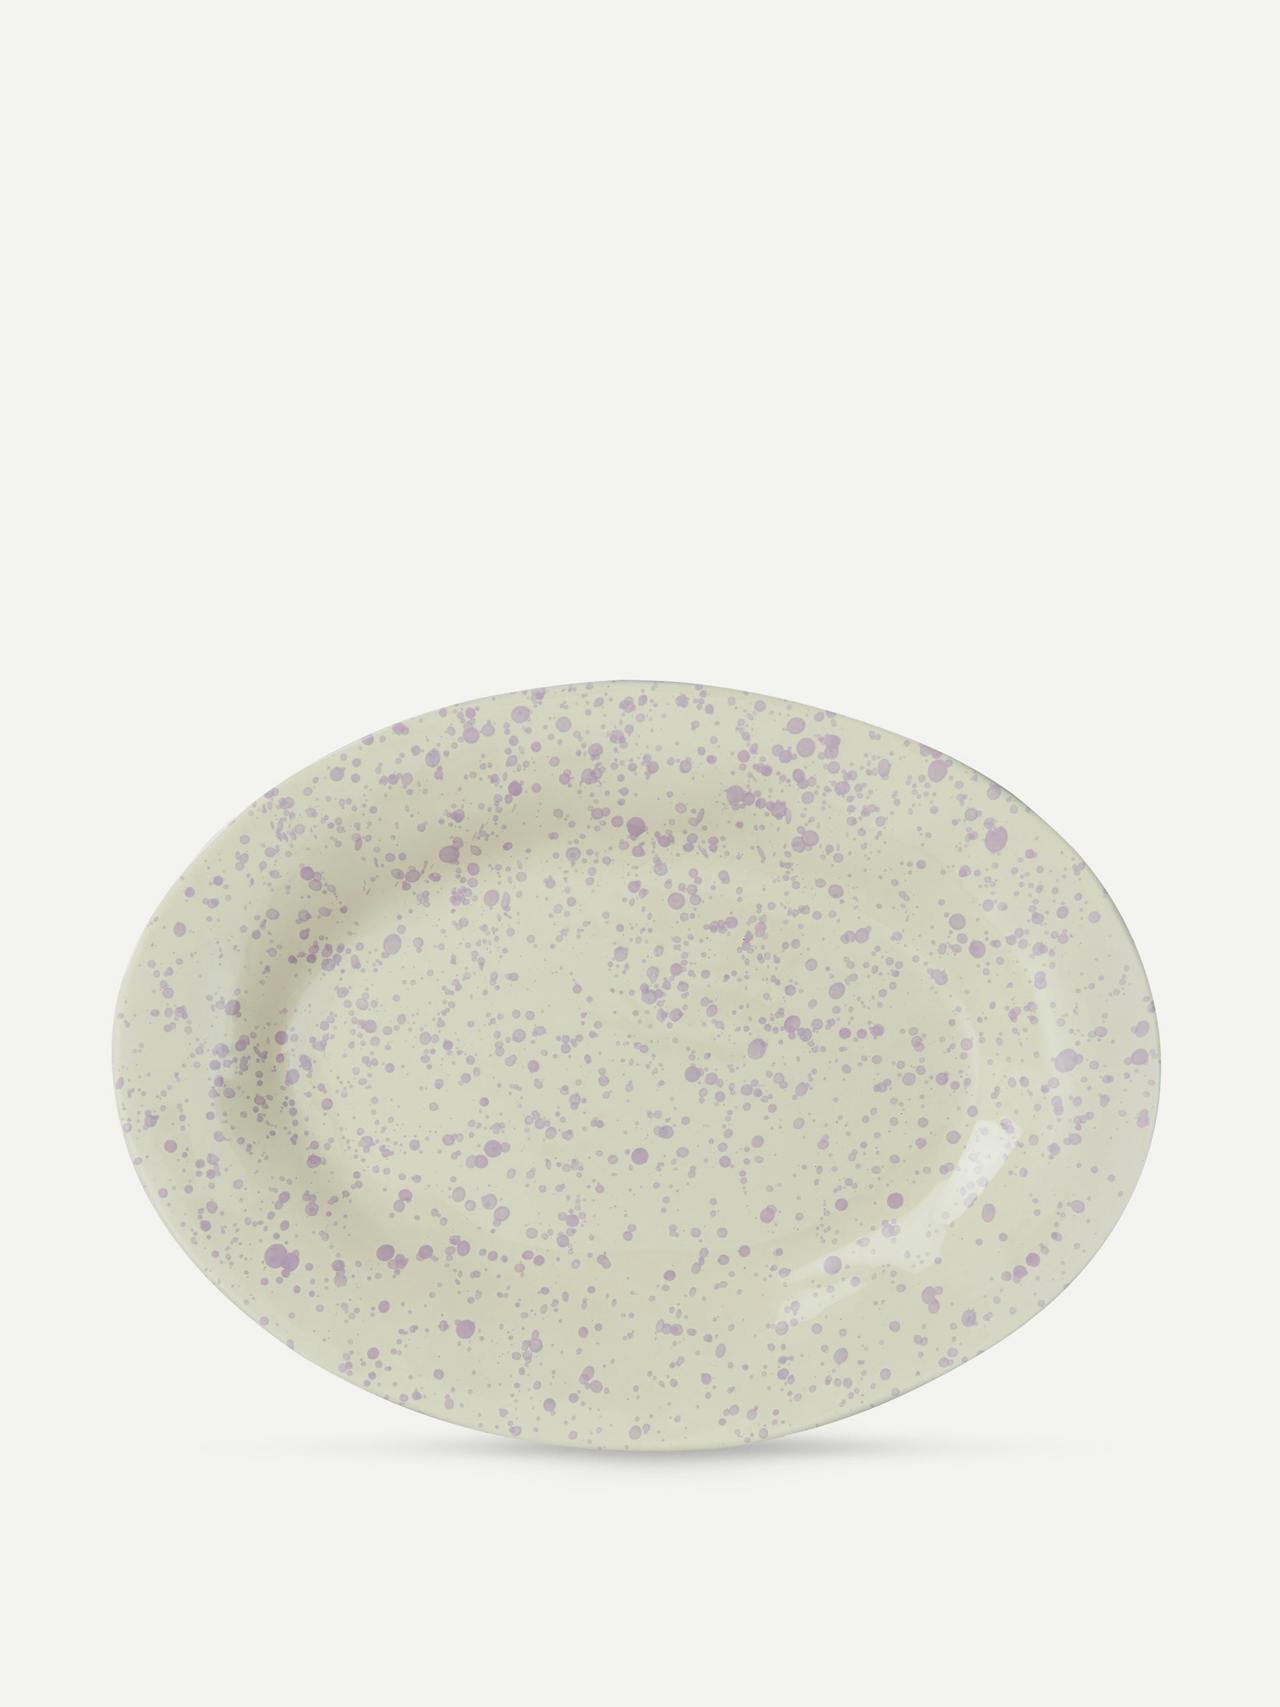 Serving platter in lilac